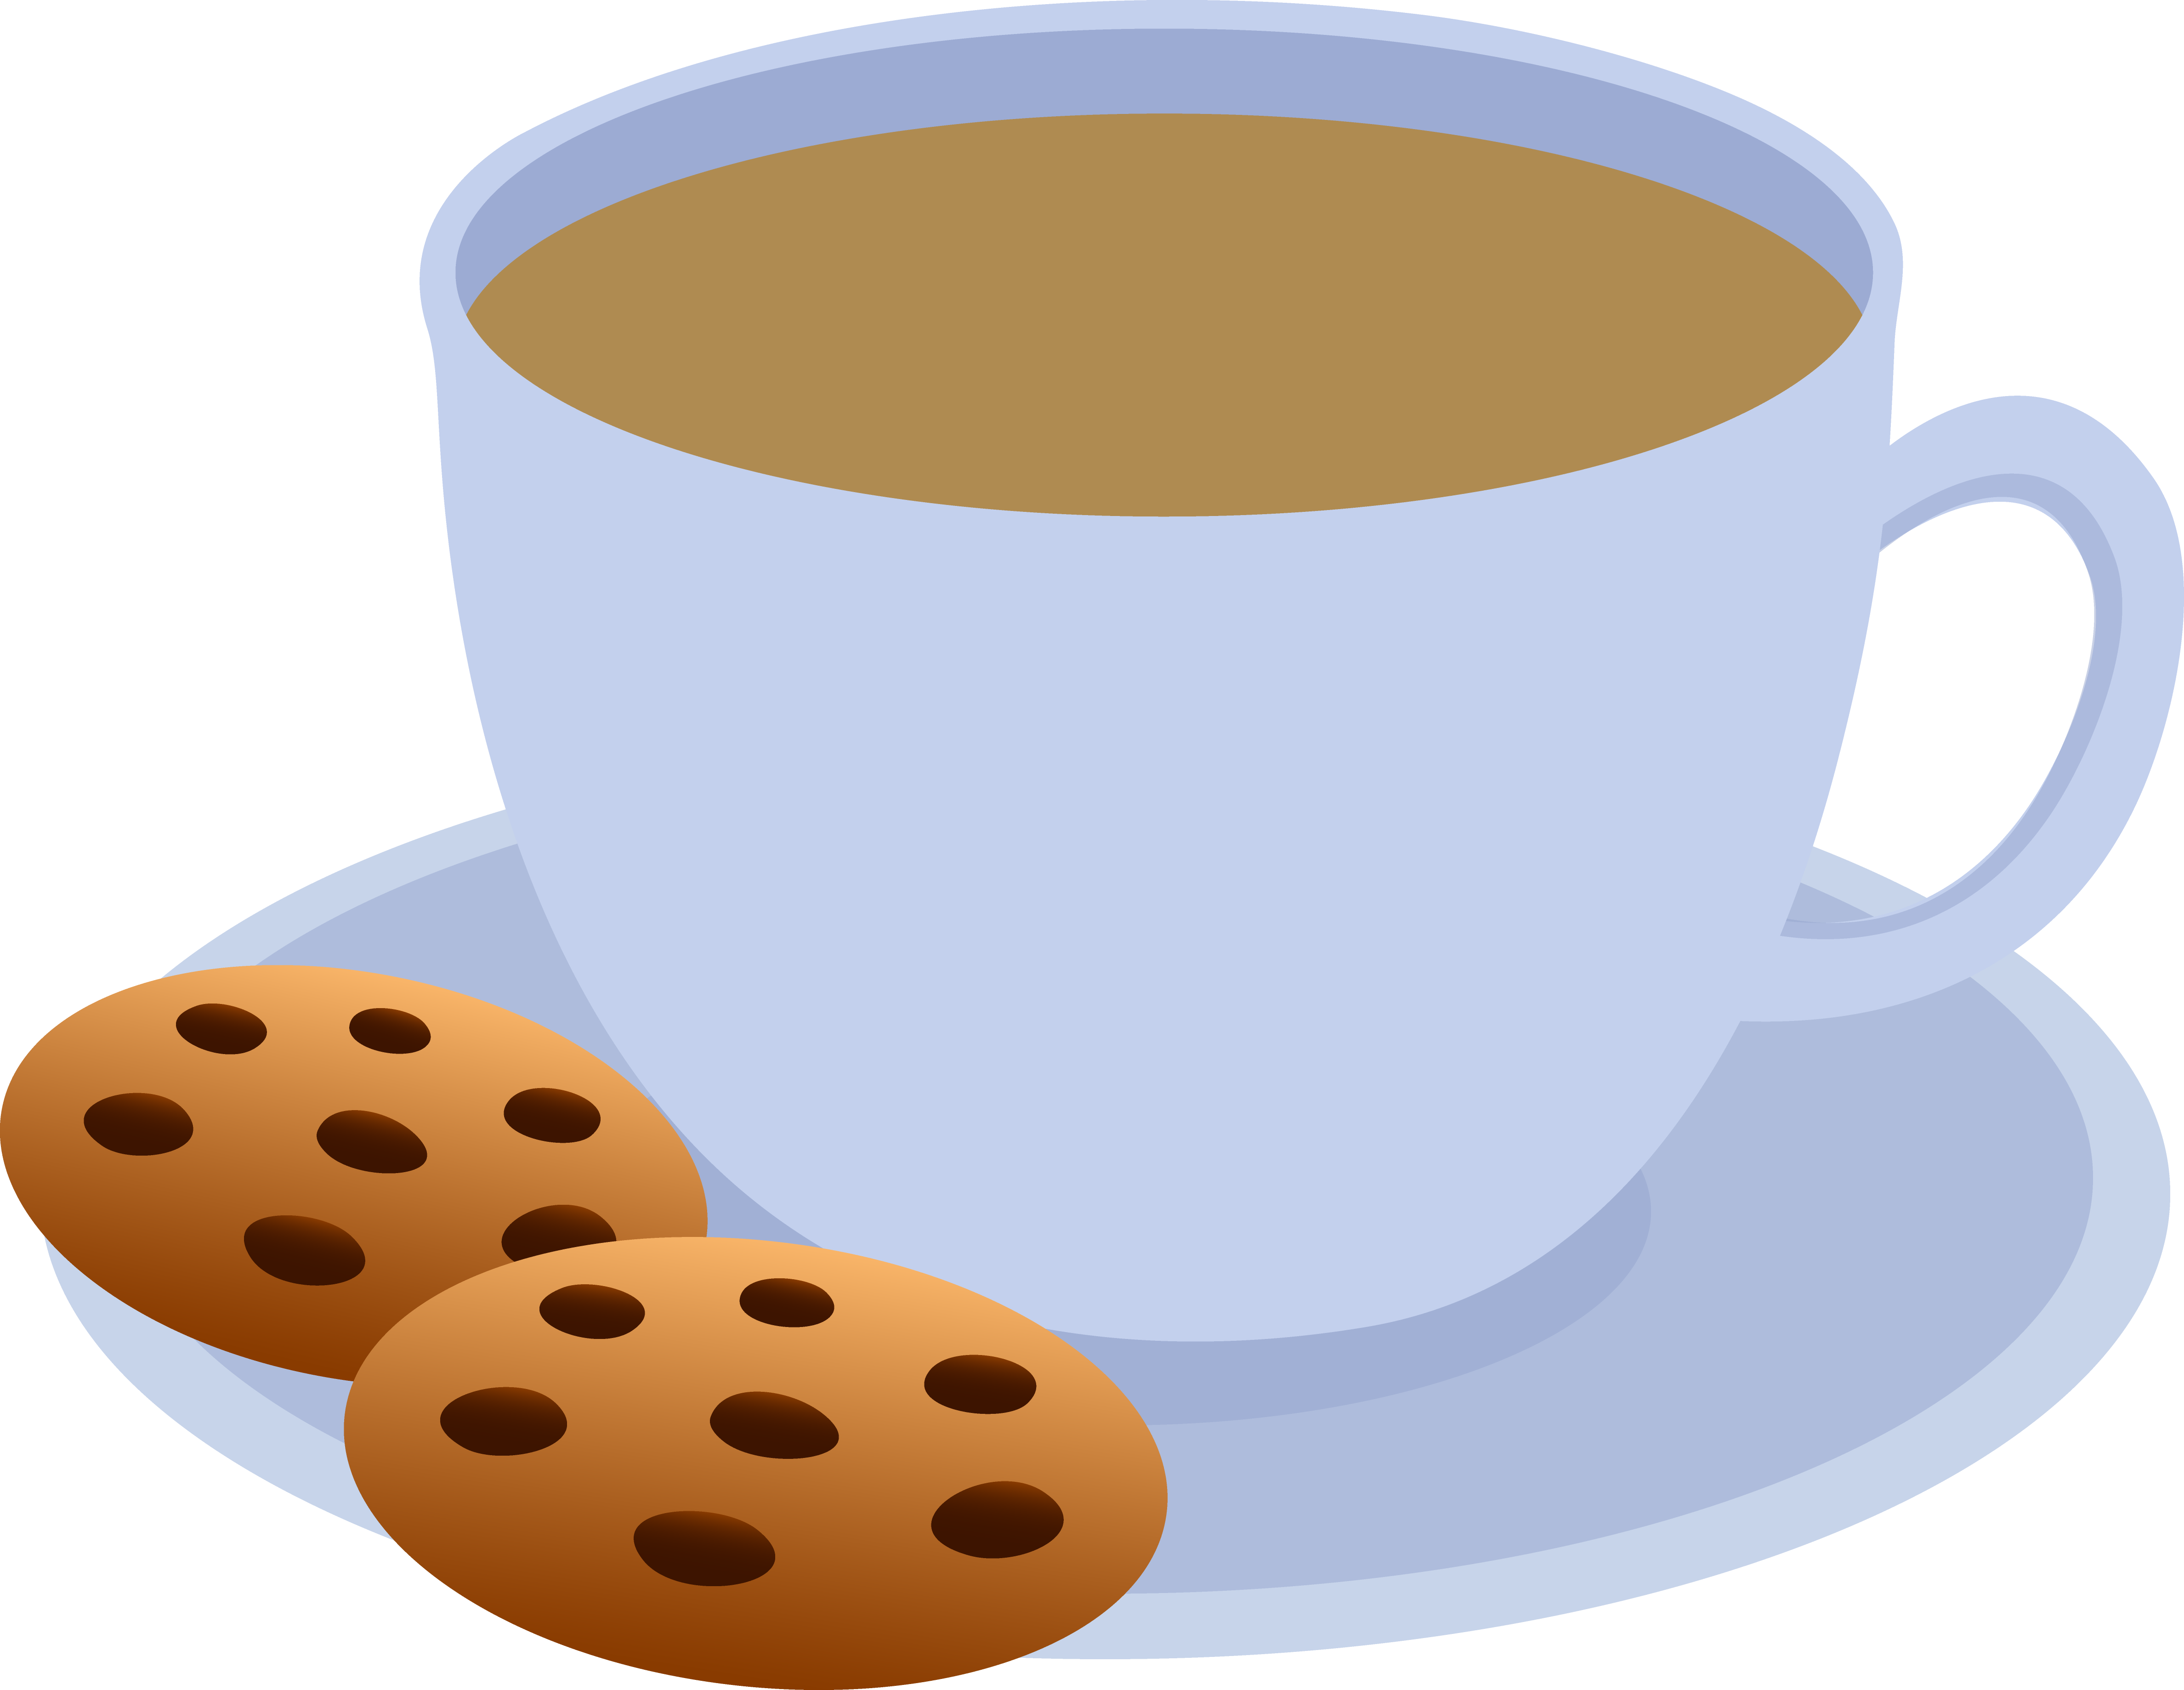 Free Cookies Transparent Image Clipart